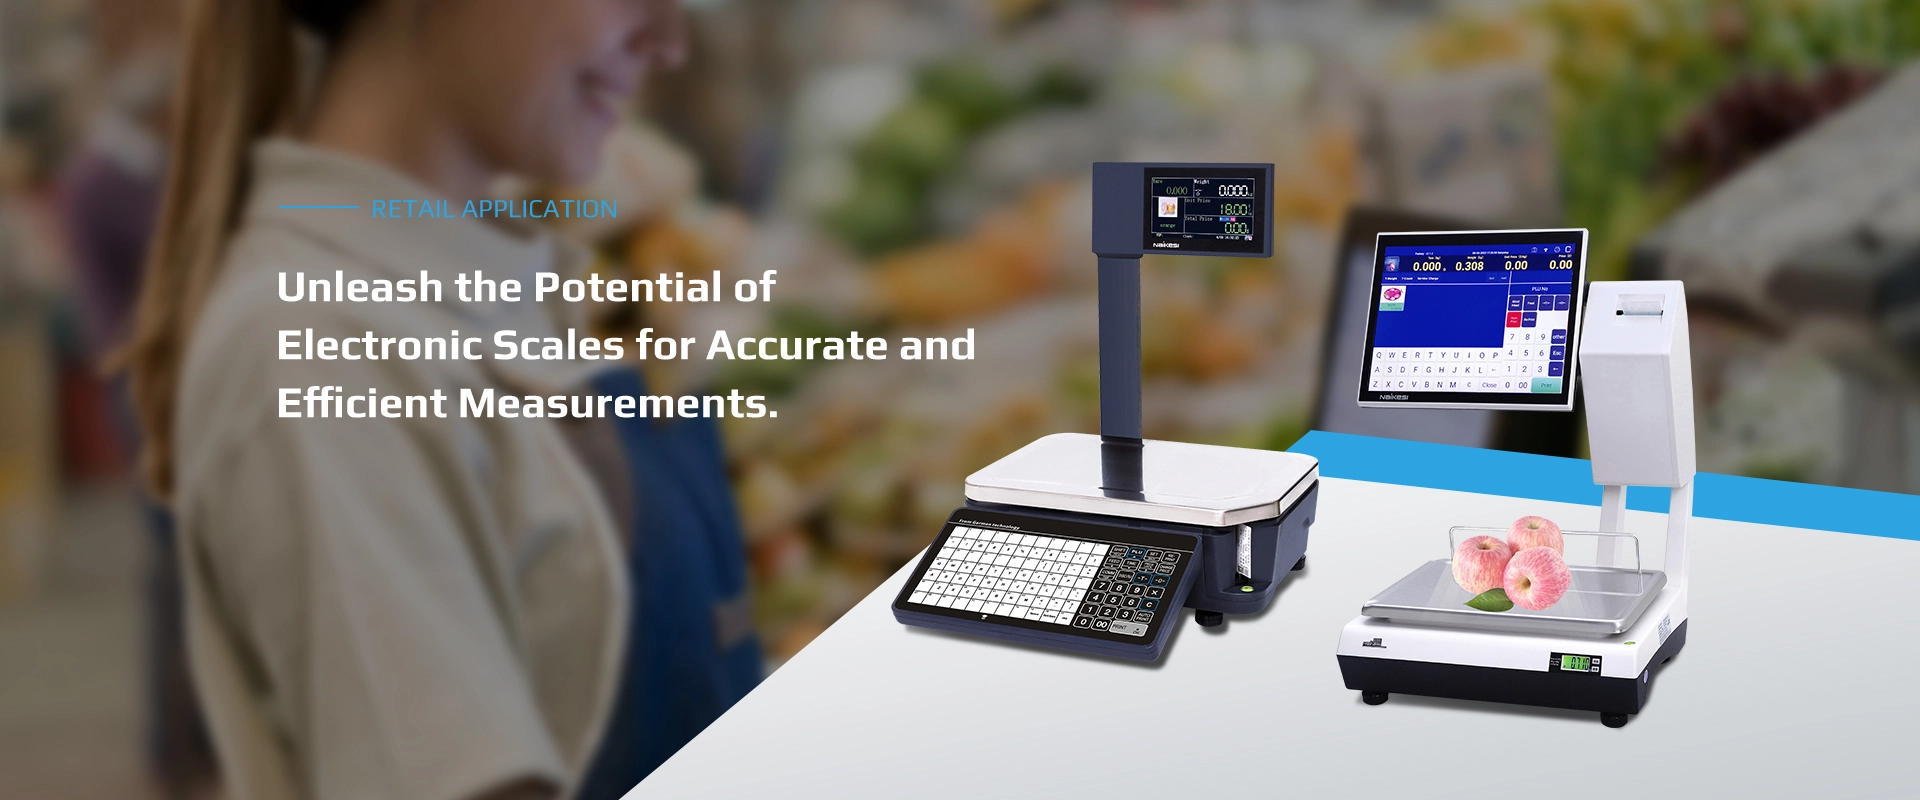 Experience Seamless Precision and Versatility in Every Application with Our Cutting-edge Electronic Scales.